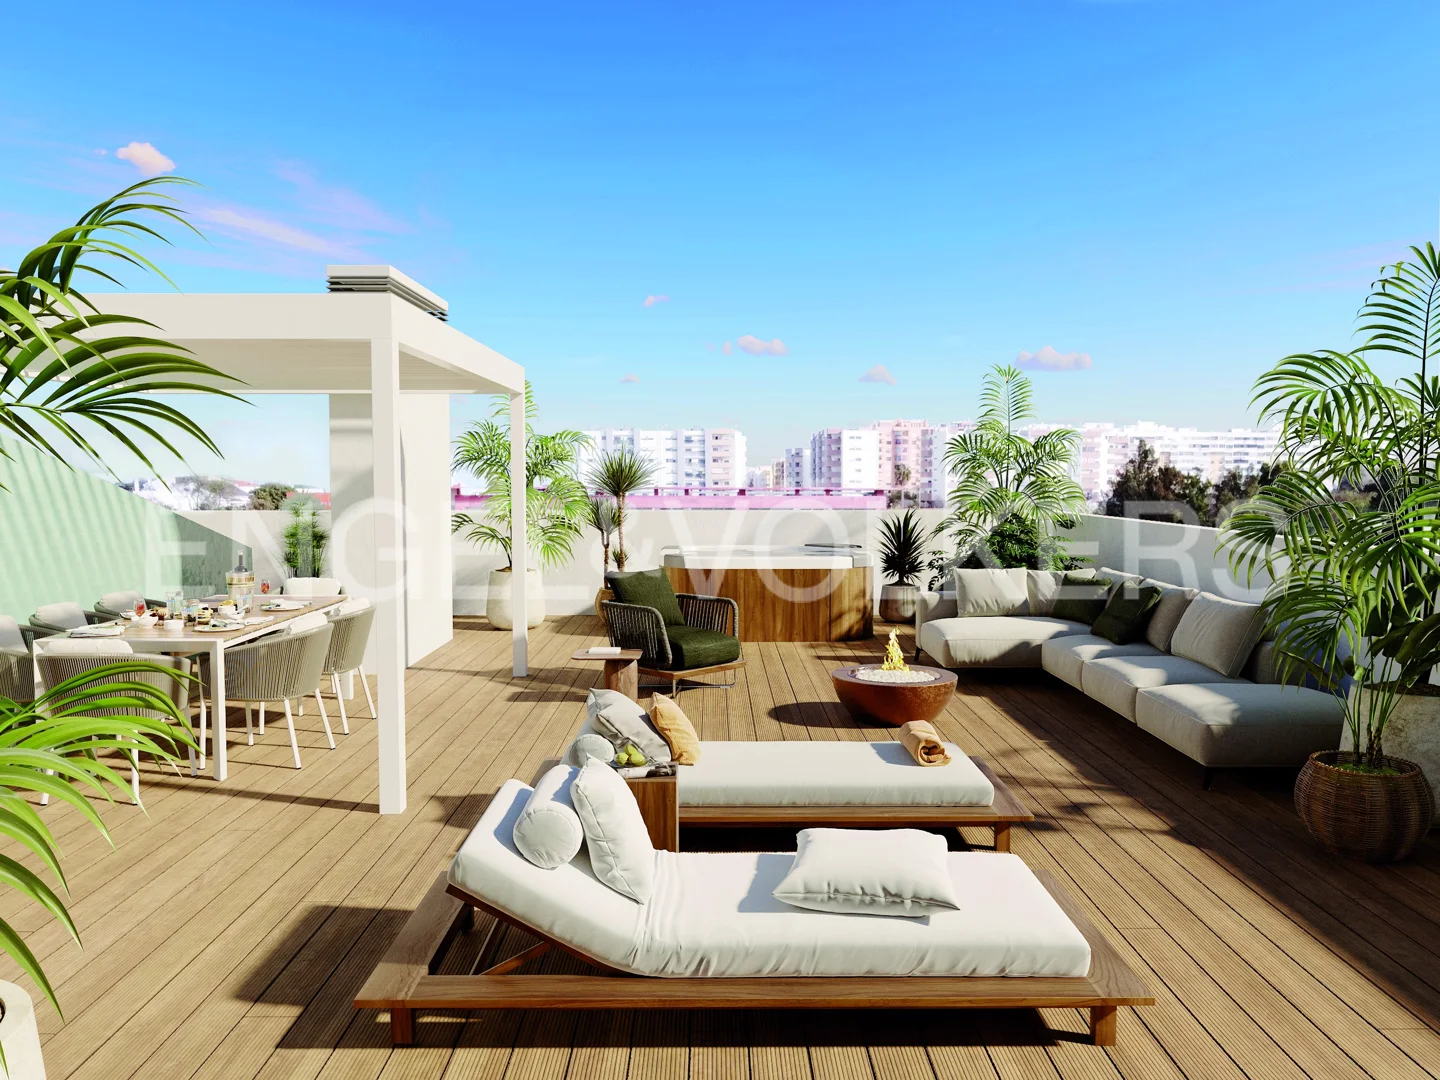 2-bed modern apartment with rooftop terrace - Top floor